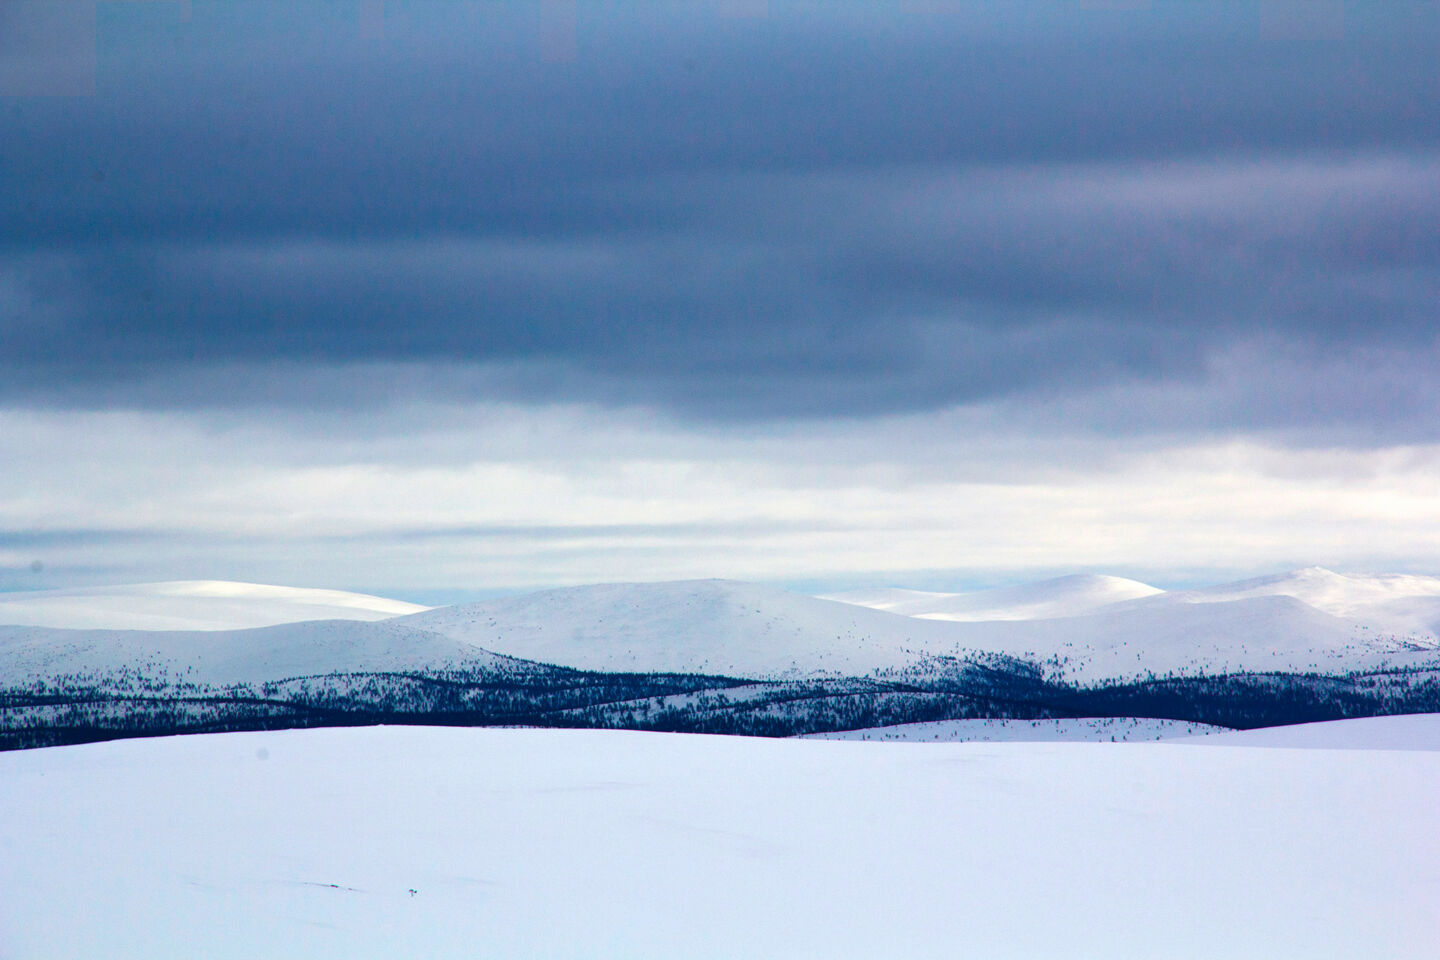 Looking to film in Finnish Lapland's national parks?